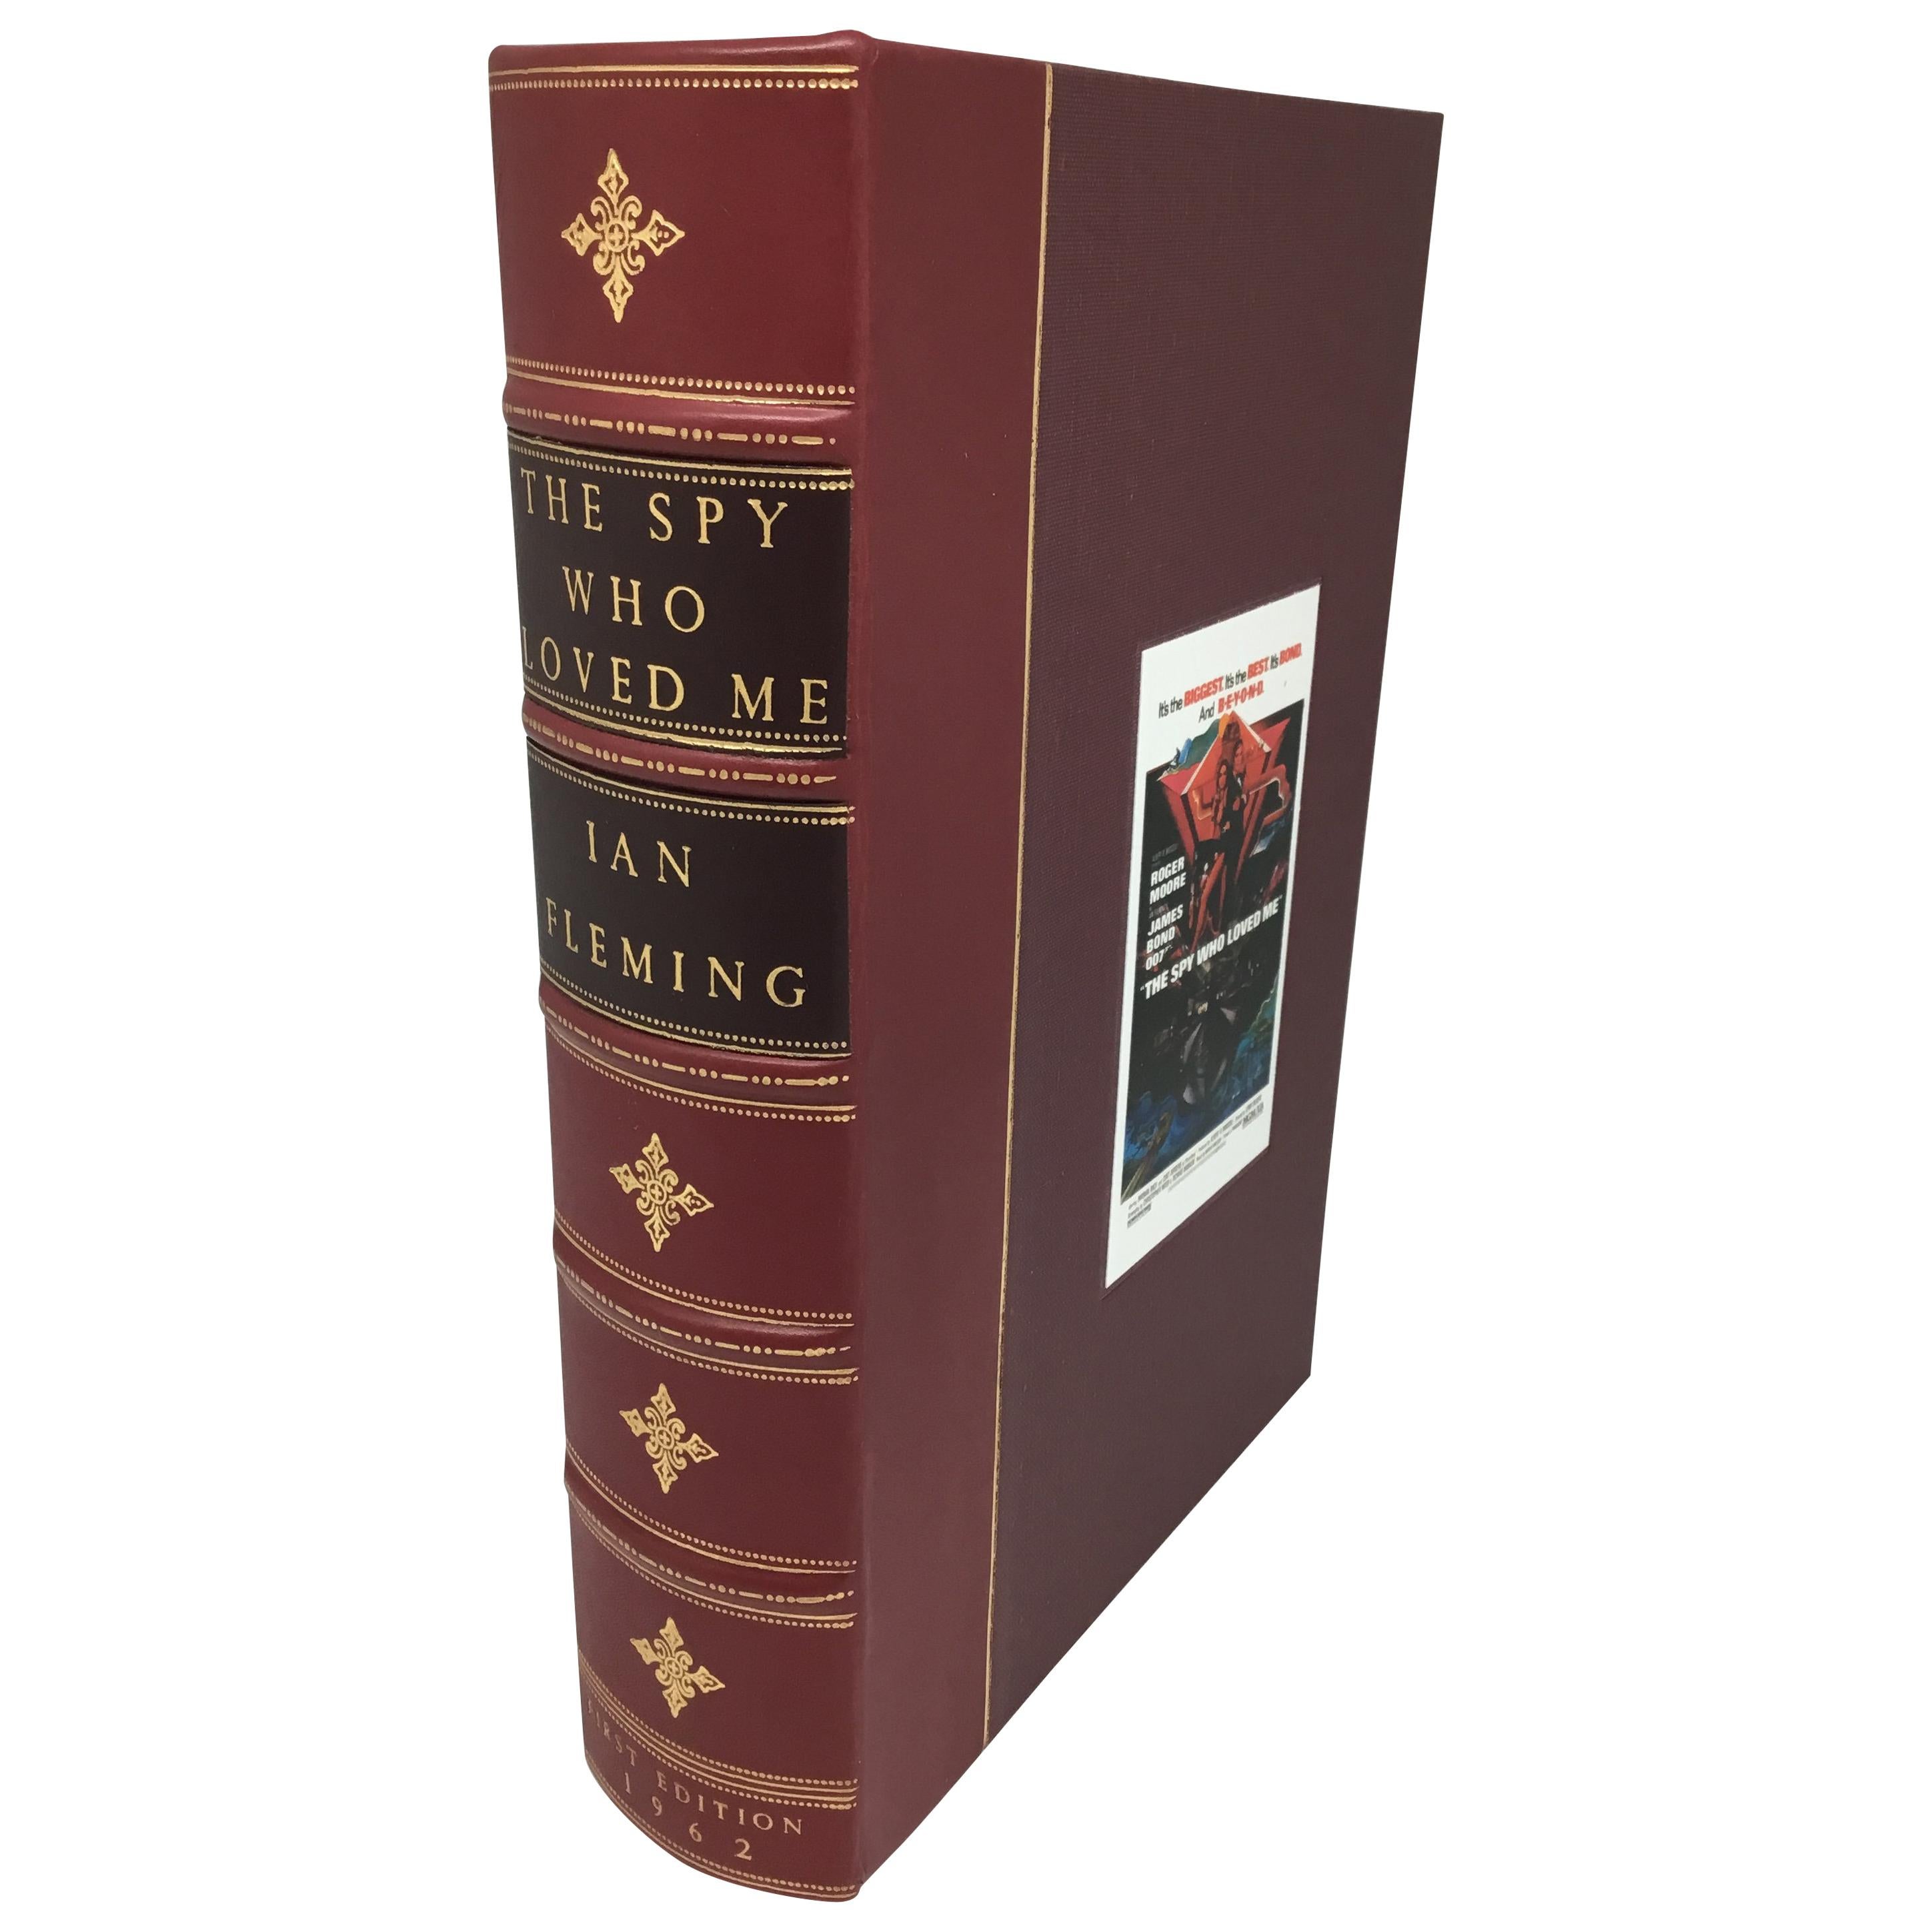 The Spy Who Loved Me by Ian Fleming, 1st Edition in Custom Leather Binding, 1962